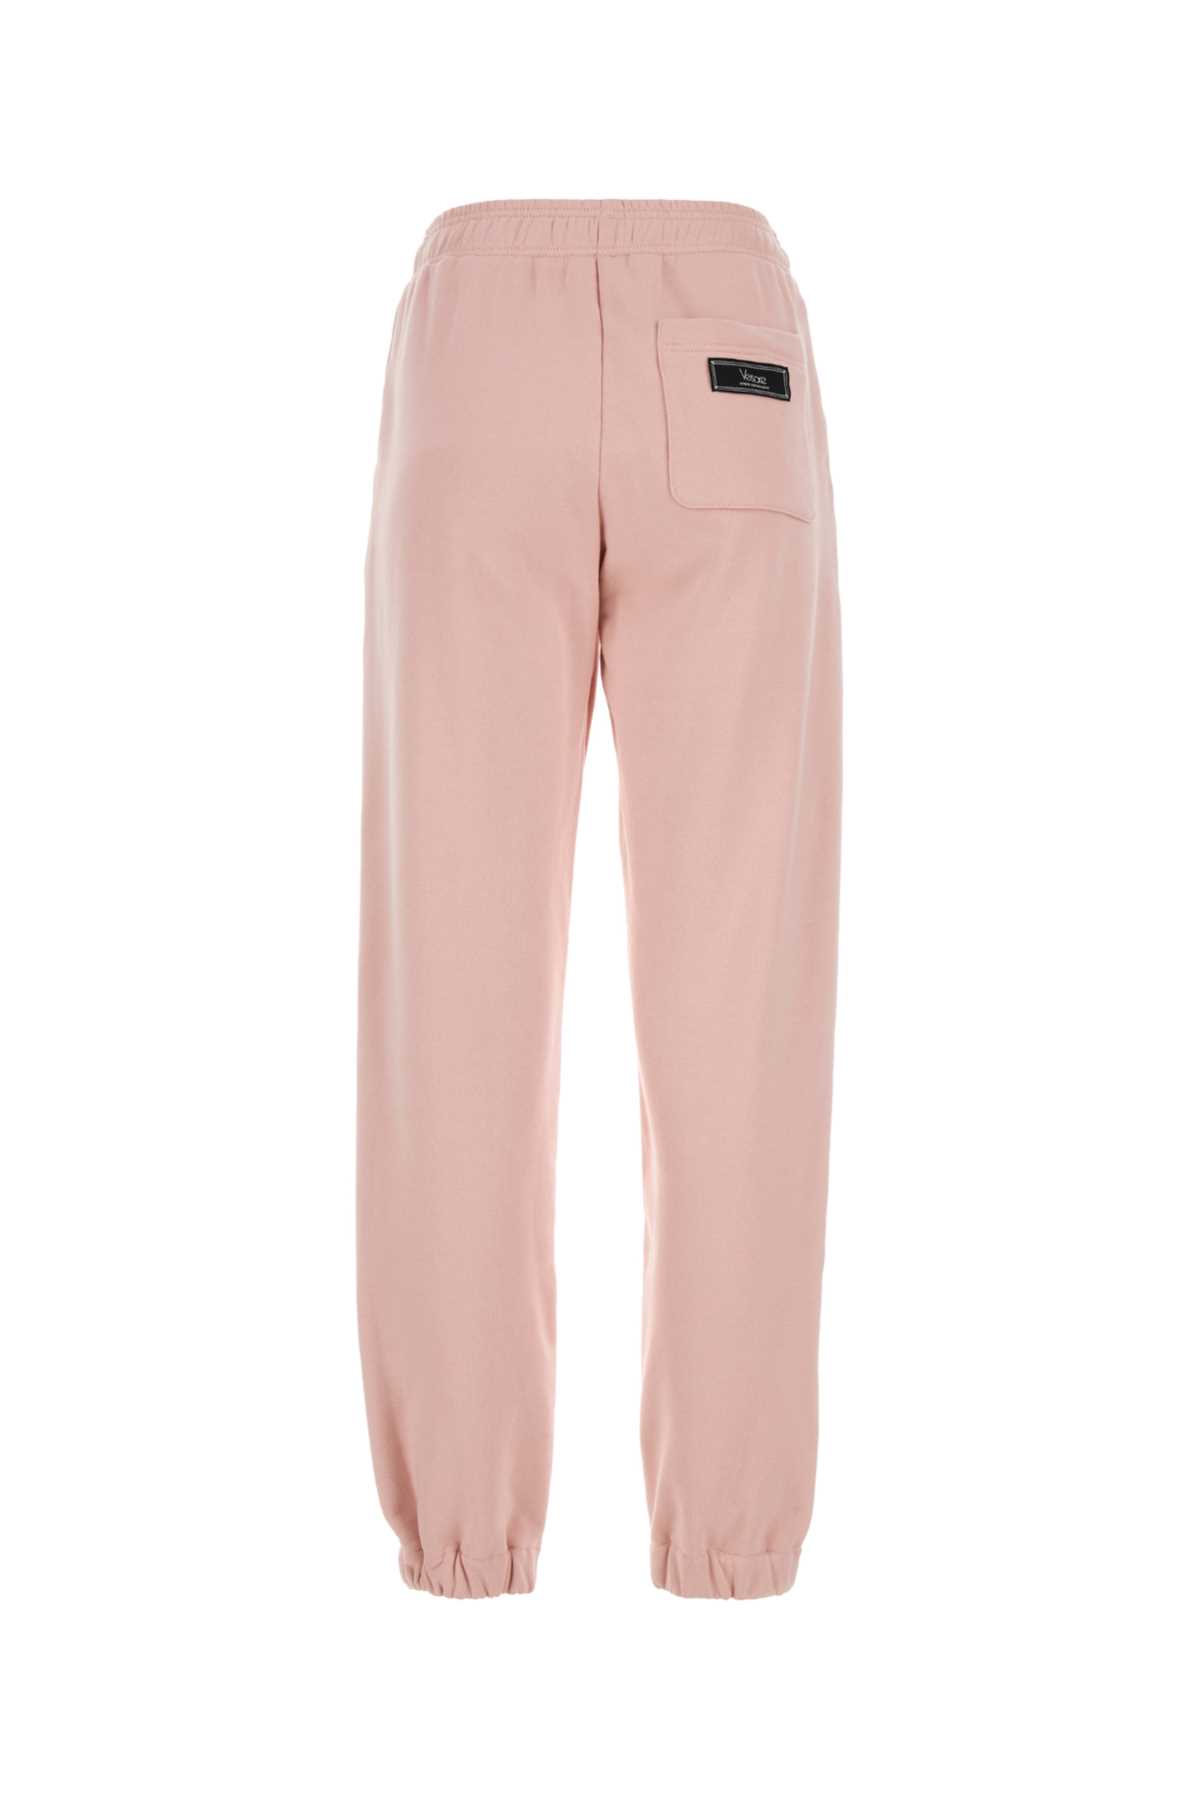 Versace Pink Cotton Joggers In Pinkwhite